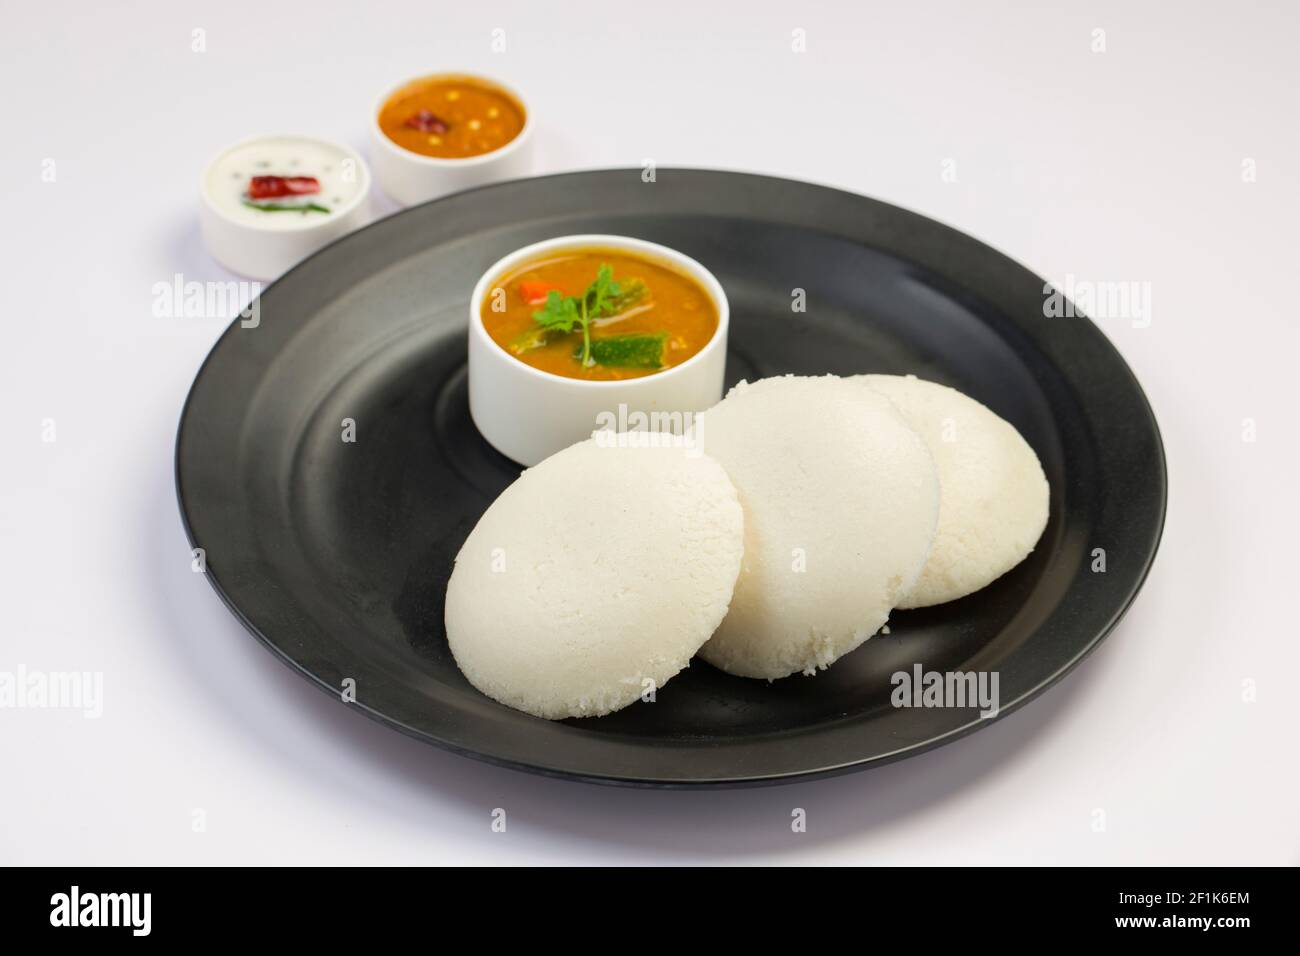 Idly or Idli, south indian main breakfast item which is beautifully arranged in a black plate on white background. Stock Photo